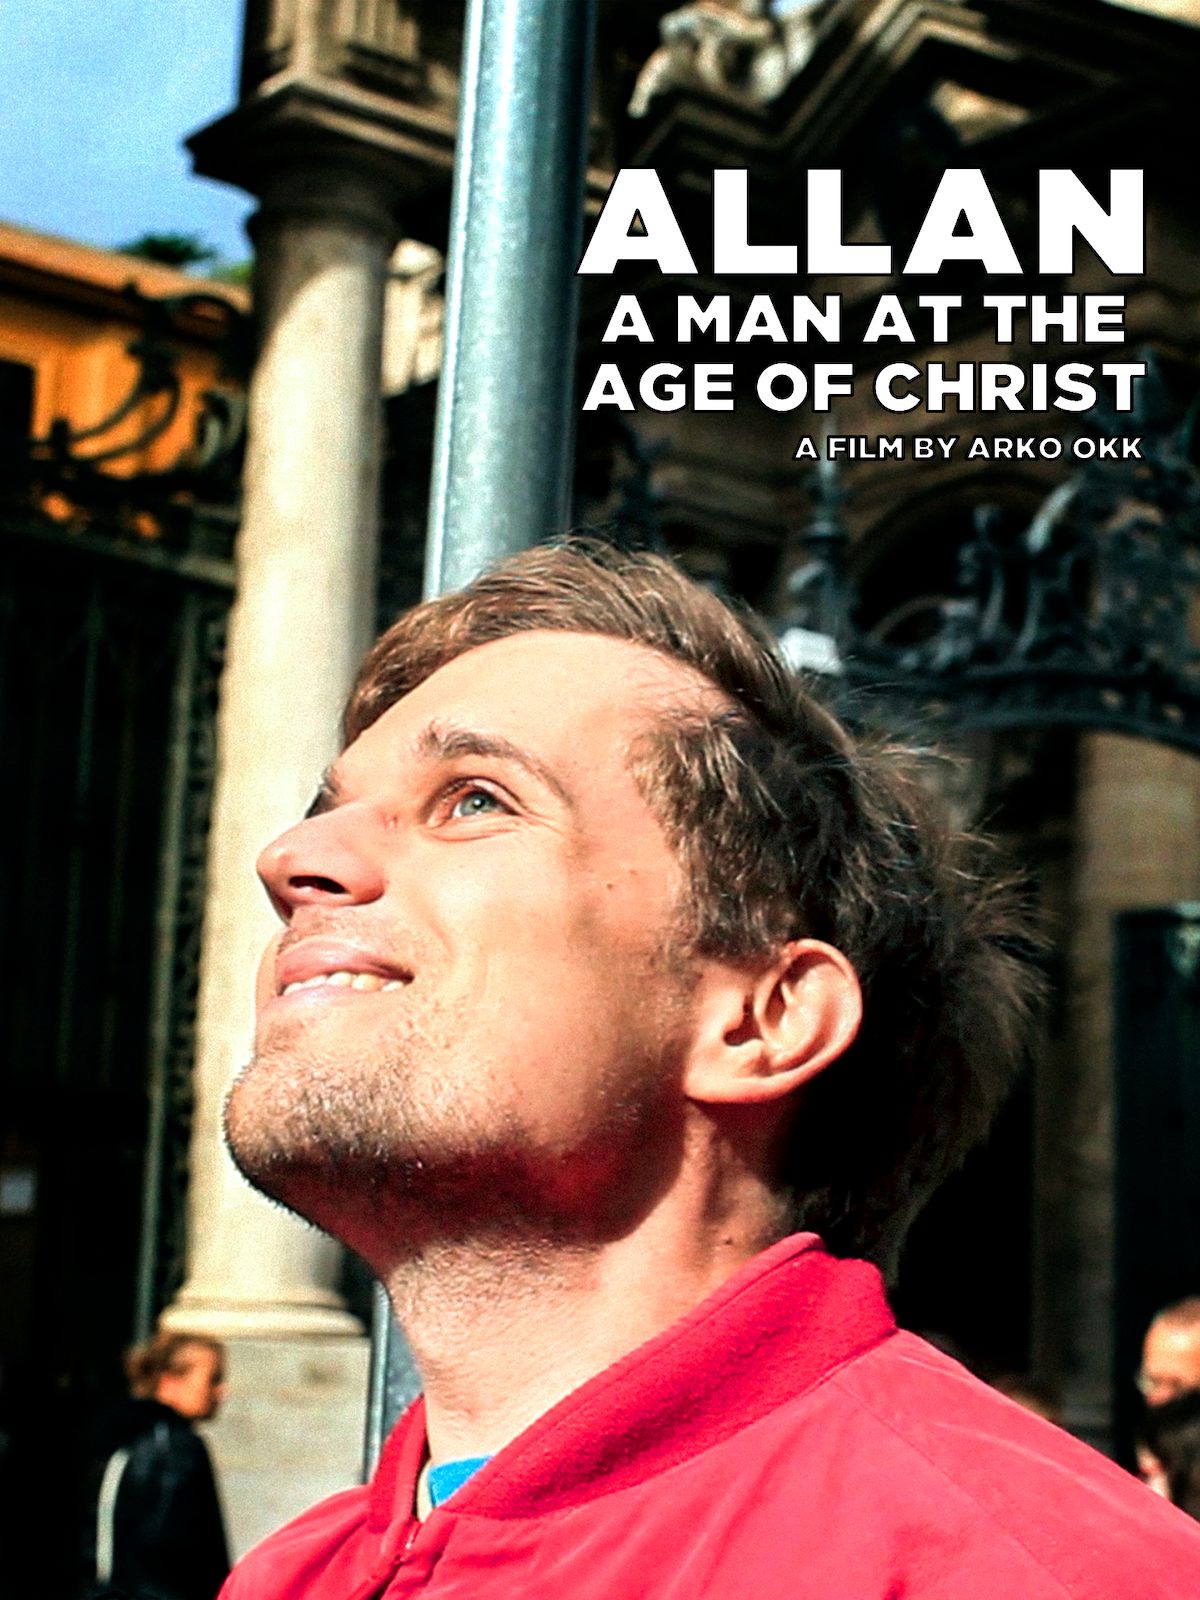 Allan, a Man at the Age of Christ